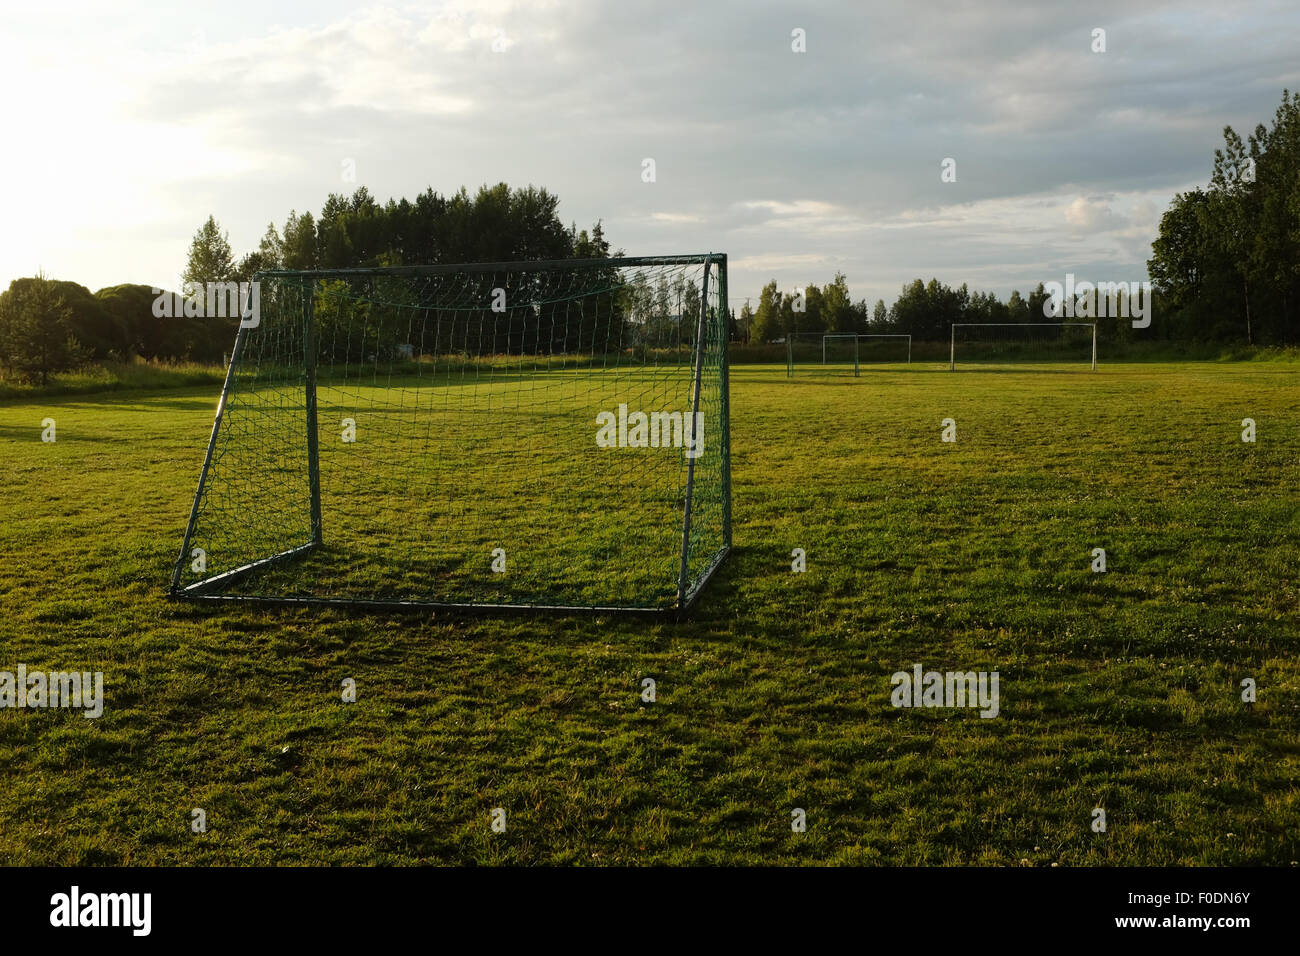 soccer goal on the village sports field Stock Photo